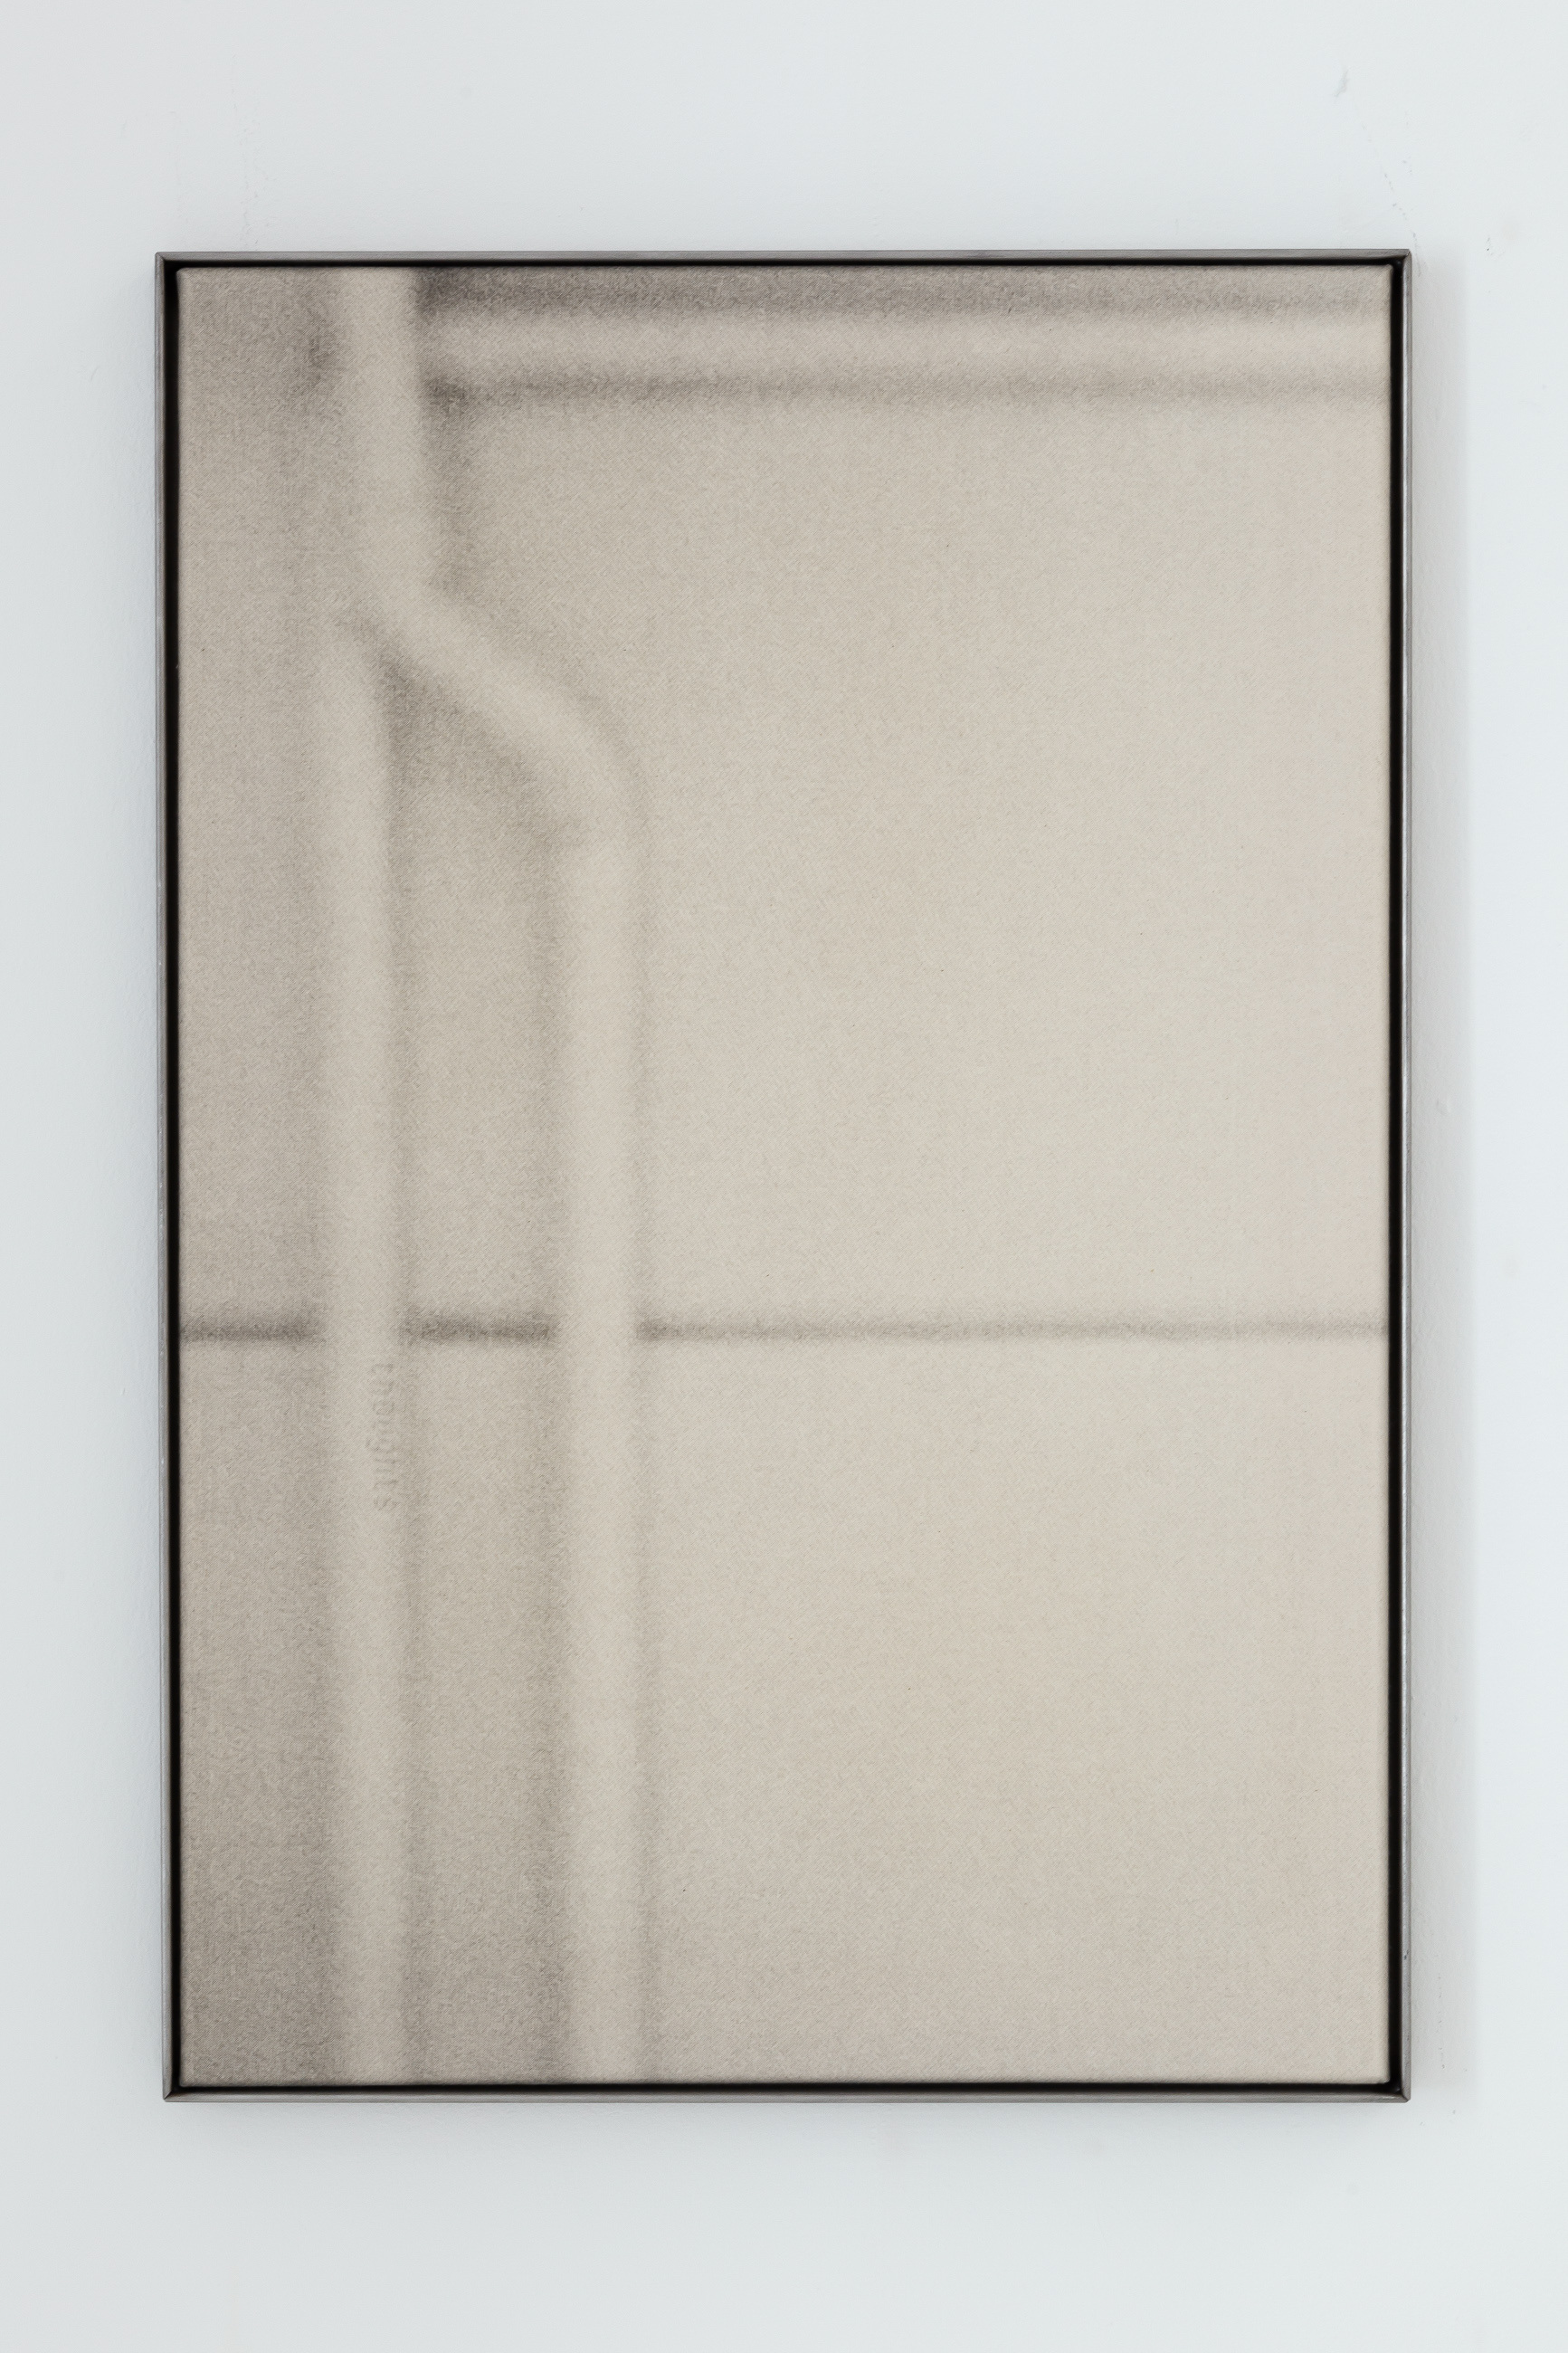 Ziva Drvaric, Thoughts, 2023, Screen print on canvas, stainless steel frame, 61x41cm